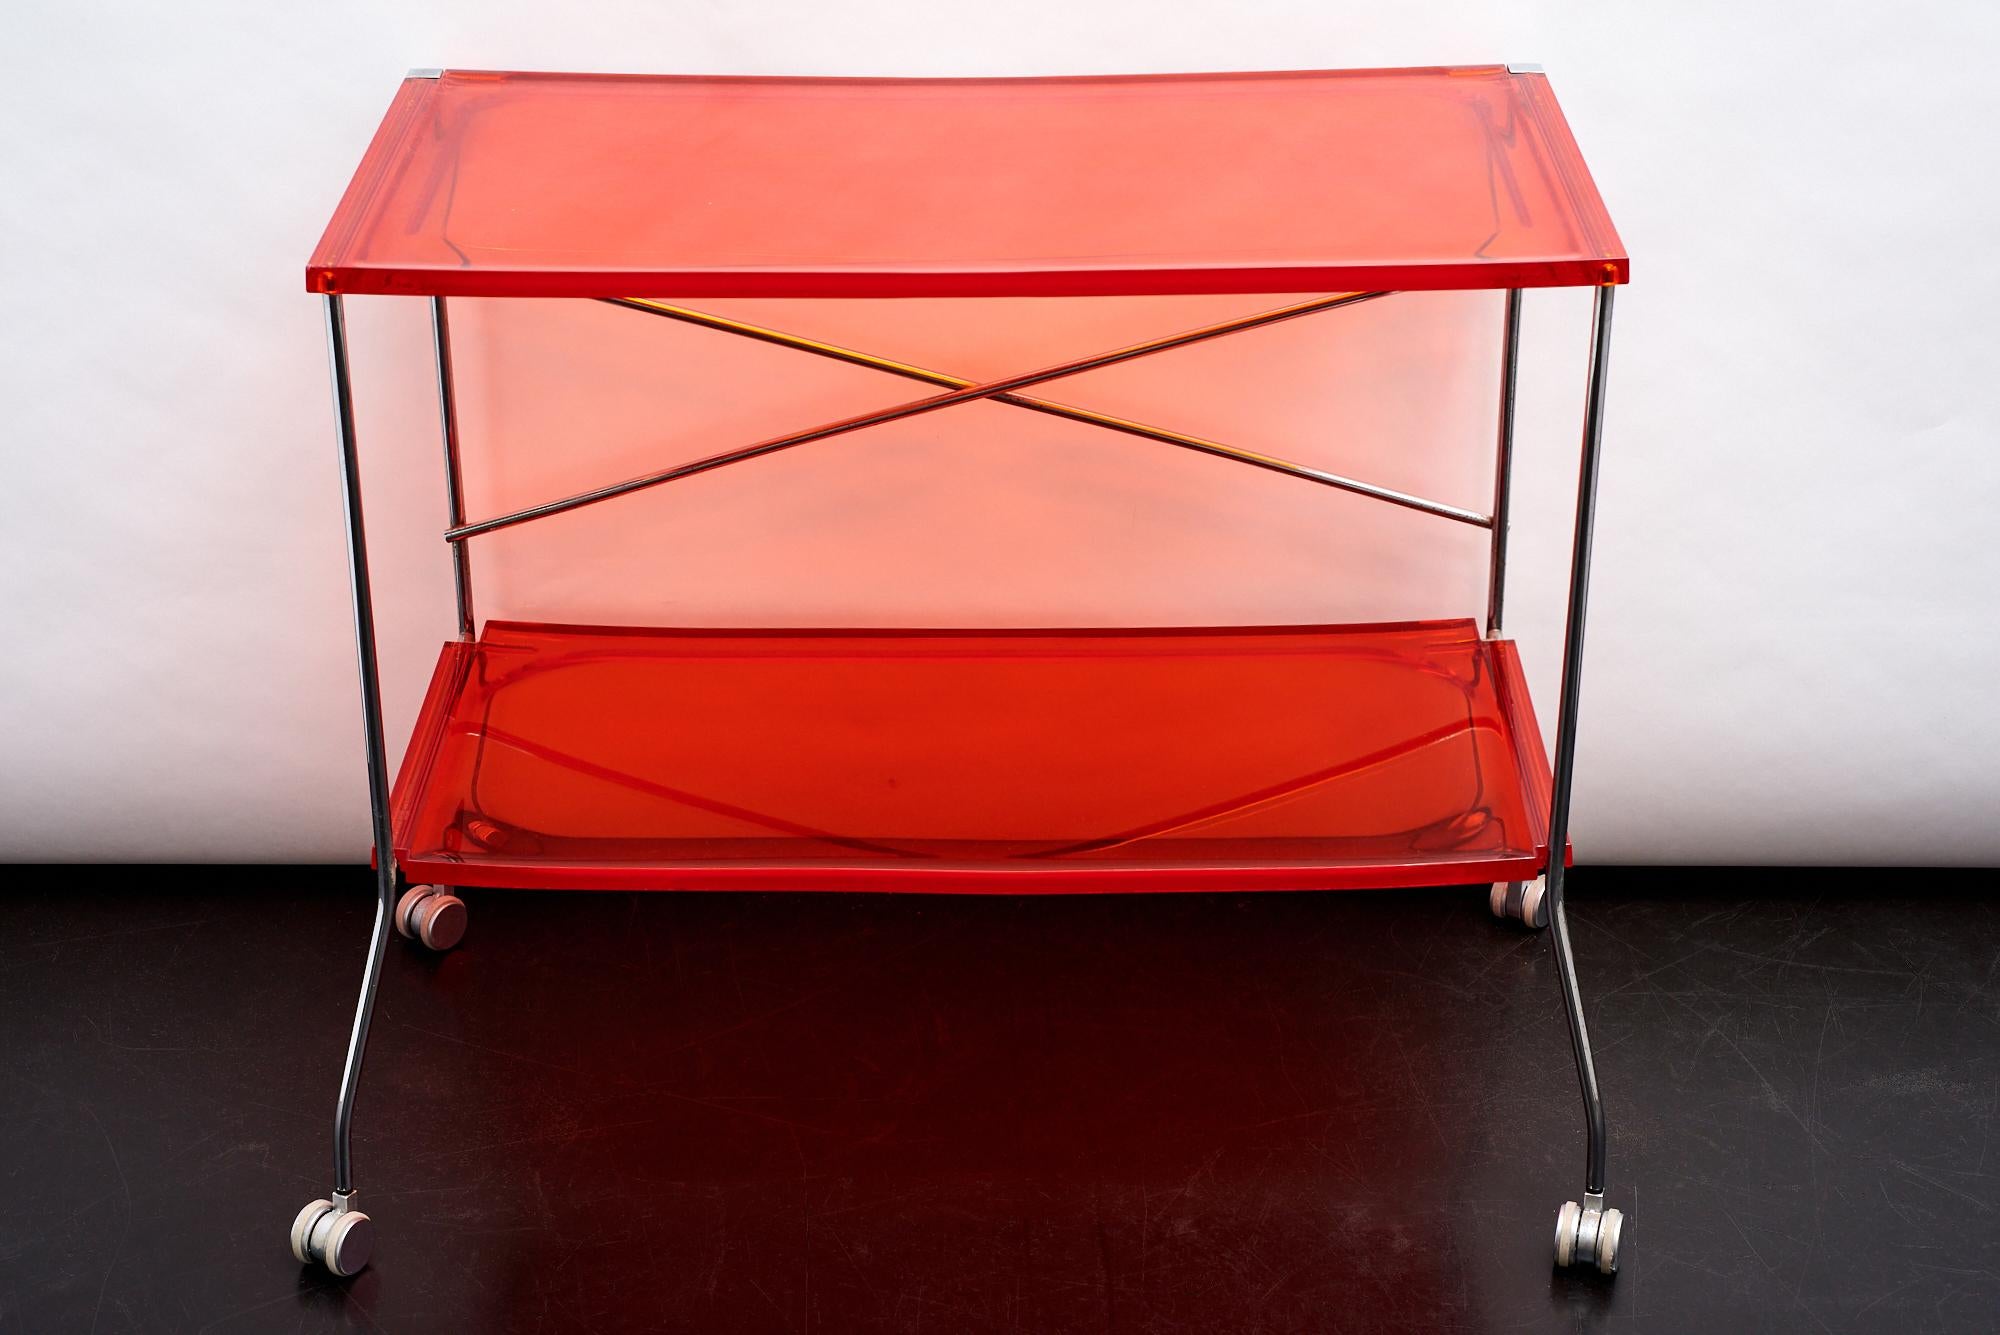 Flip folding trolley by Antonio Citterio for Kartell in shocking orange.
The plans, independent of each other, are from PMMA lenticular sheet and offer extreme multi functionality and aesthetics. Flip can be used as a cute little desk, or as a